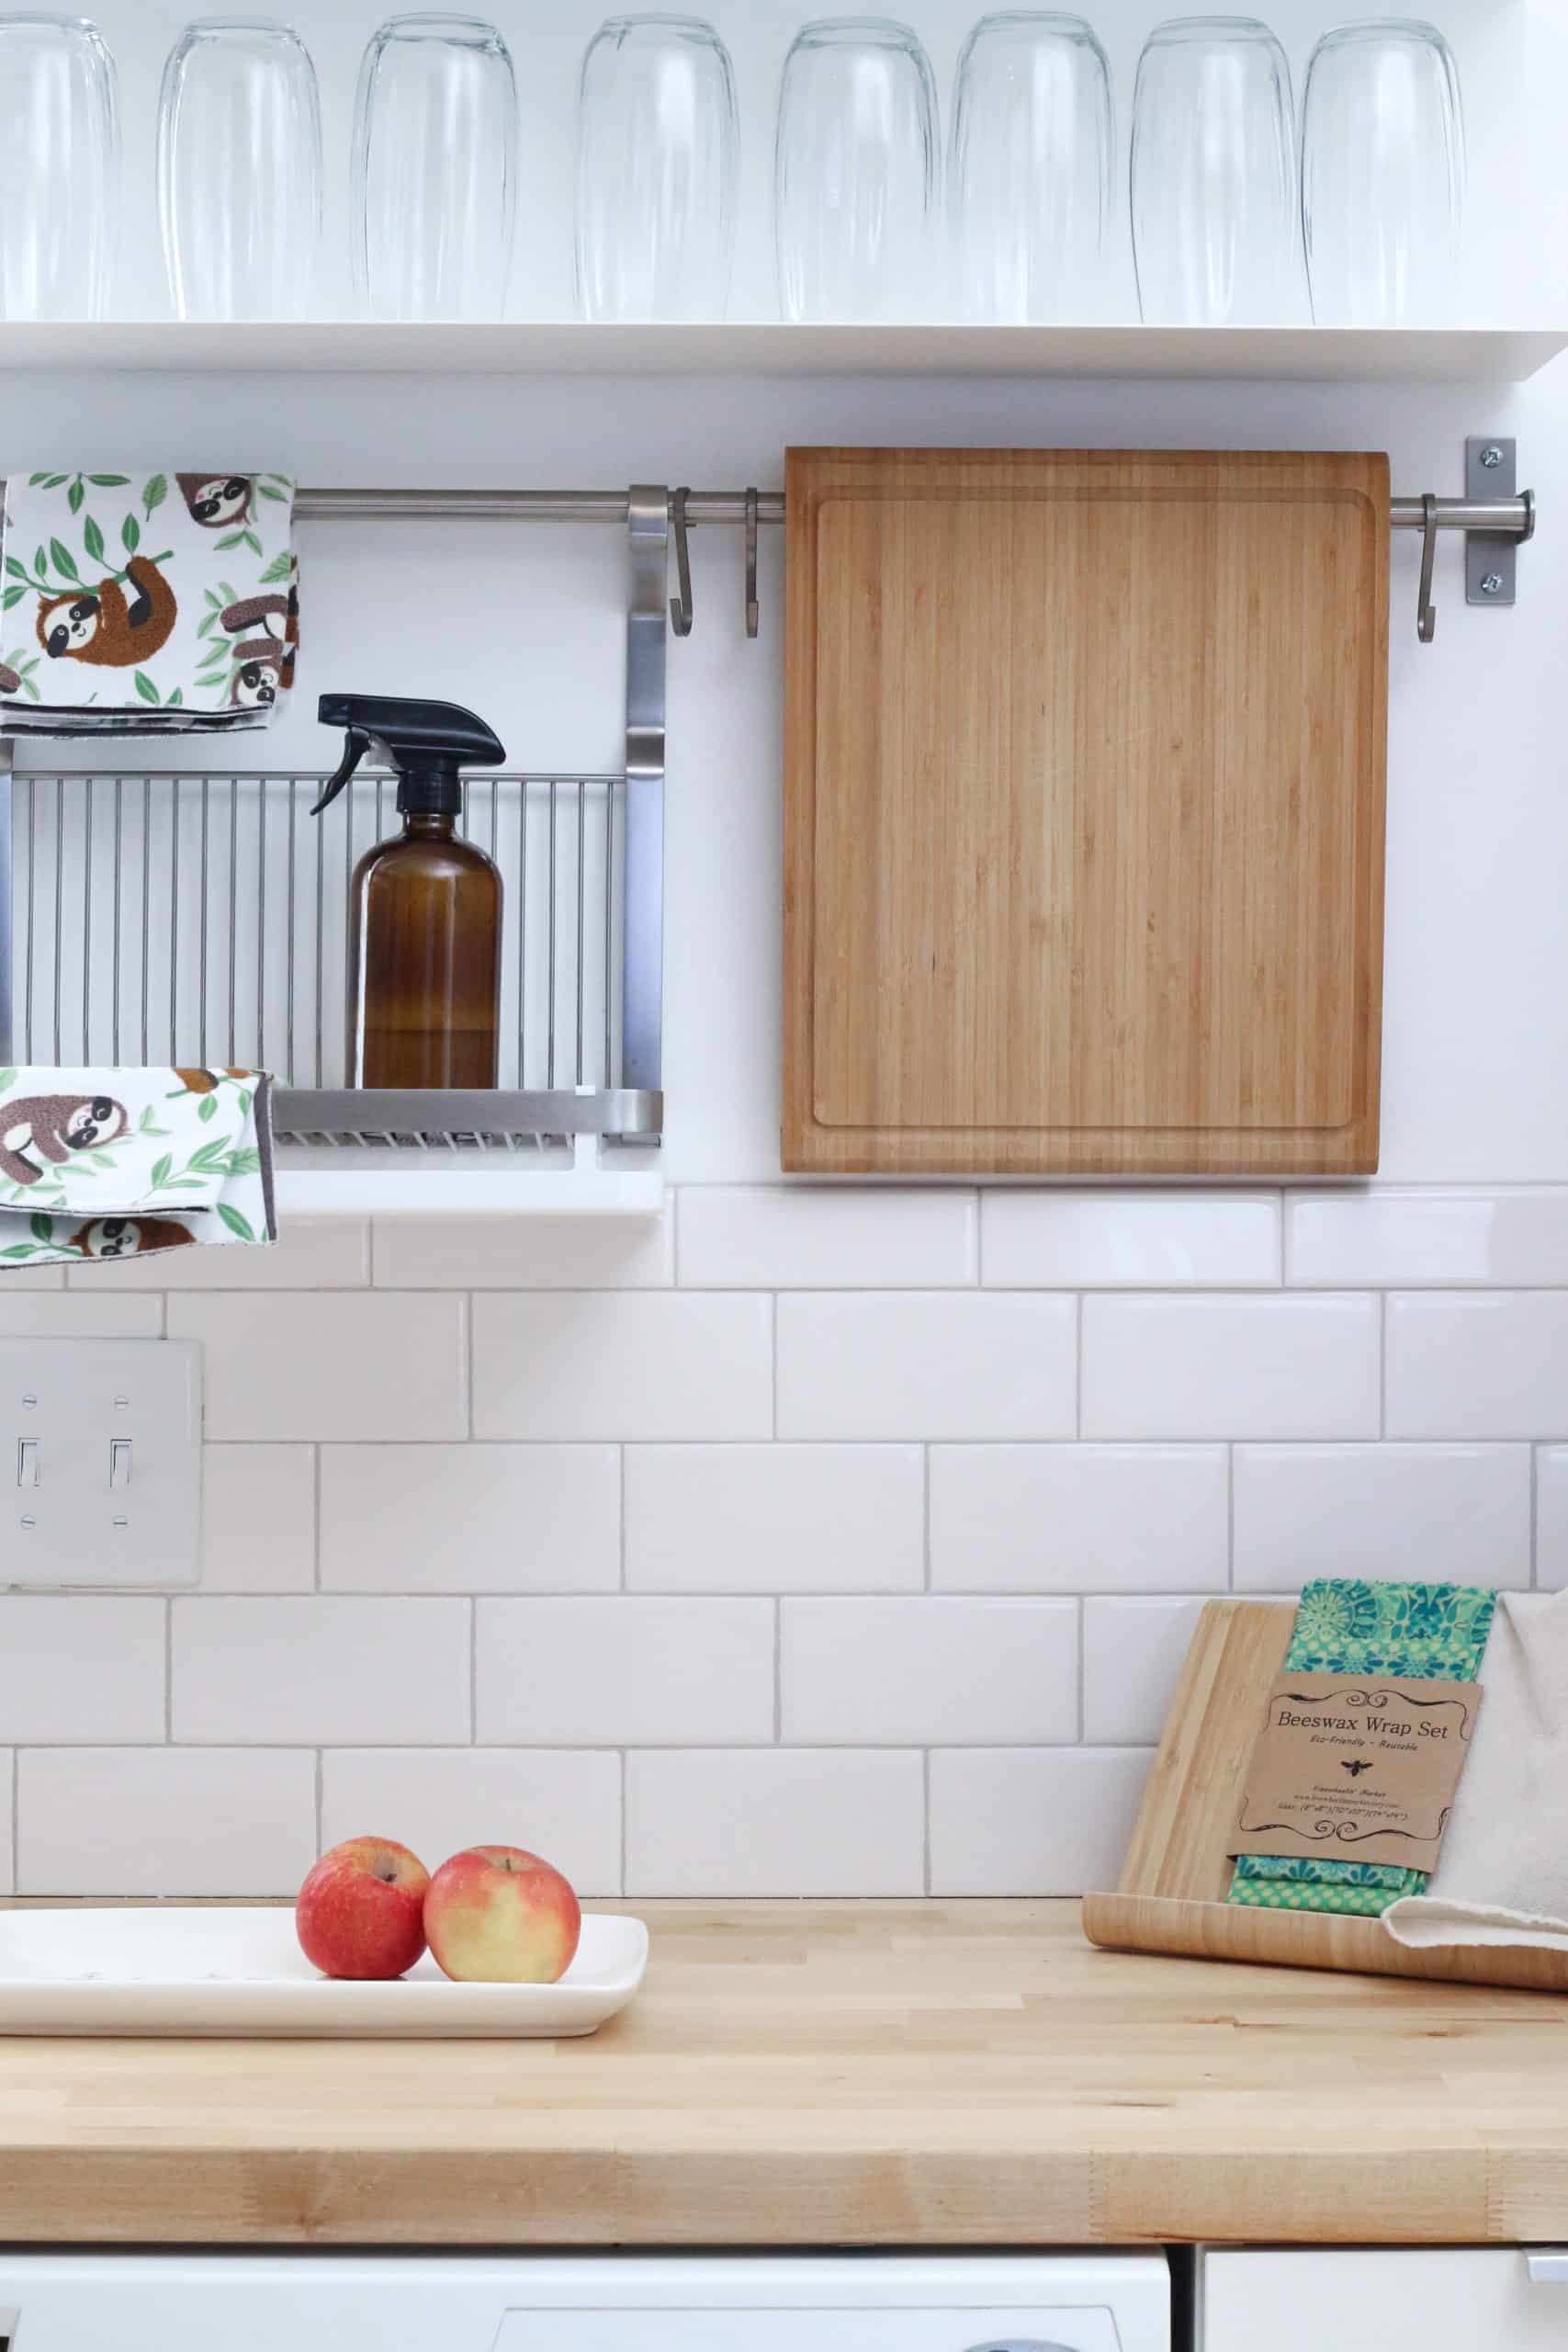 45+ Practical Kitchen Organization Ideas that Will Save You a Ton of Space